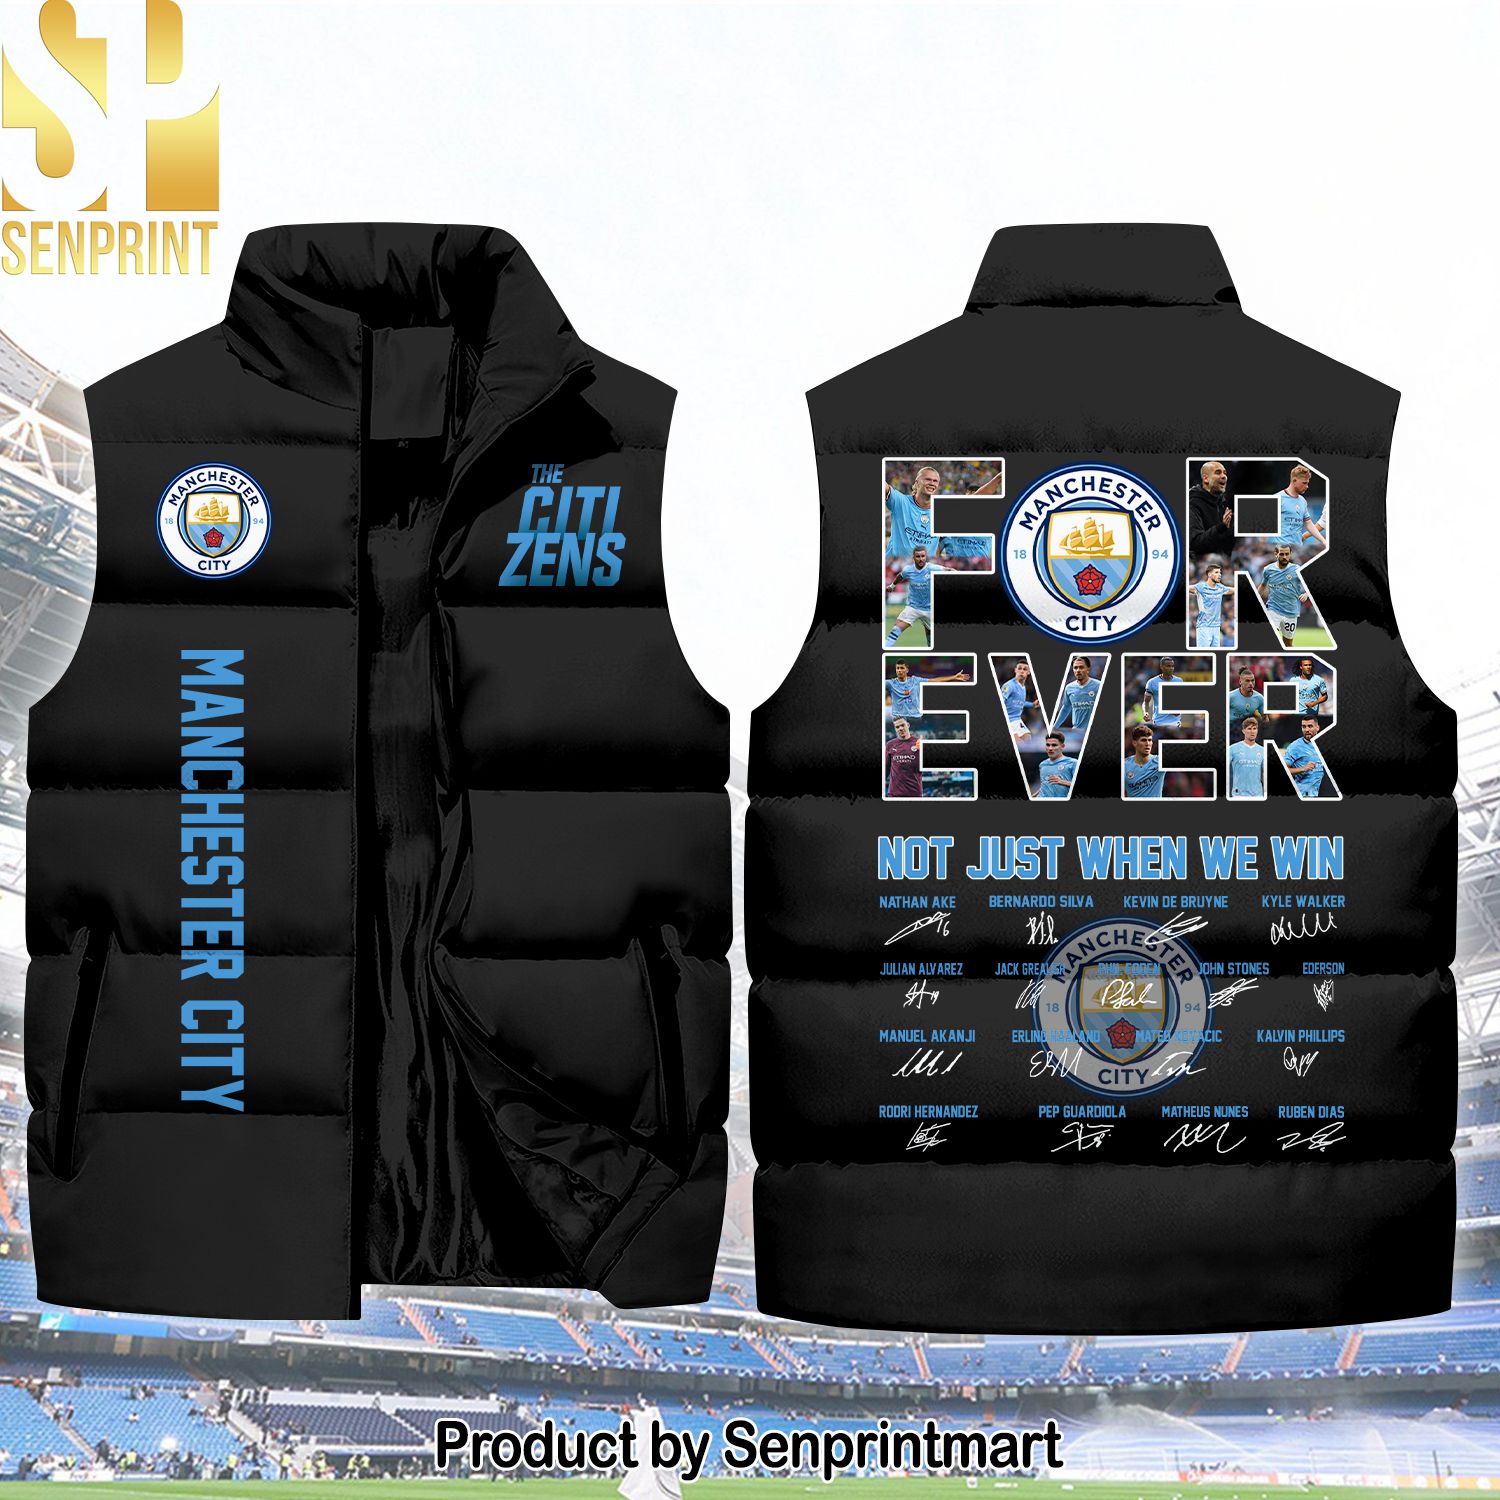 English Premier League Forever Manchester City For Fans Sleeveless Jacket